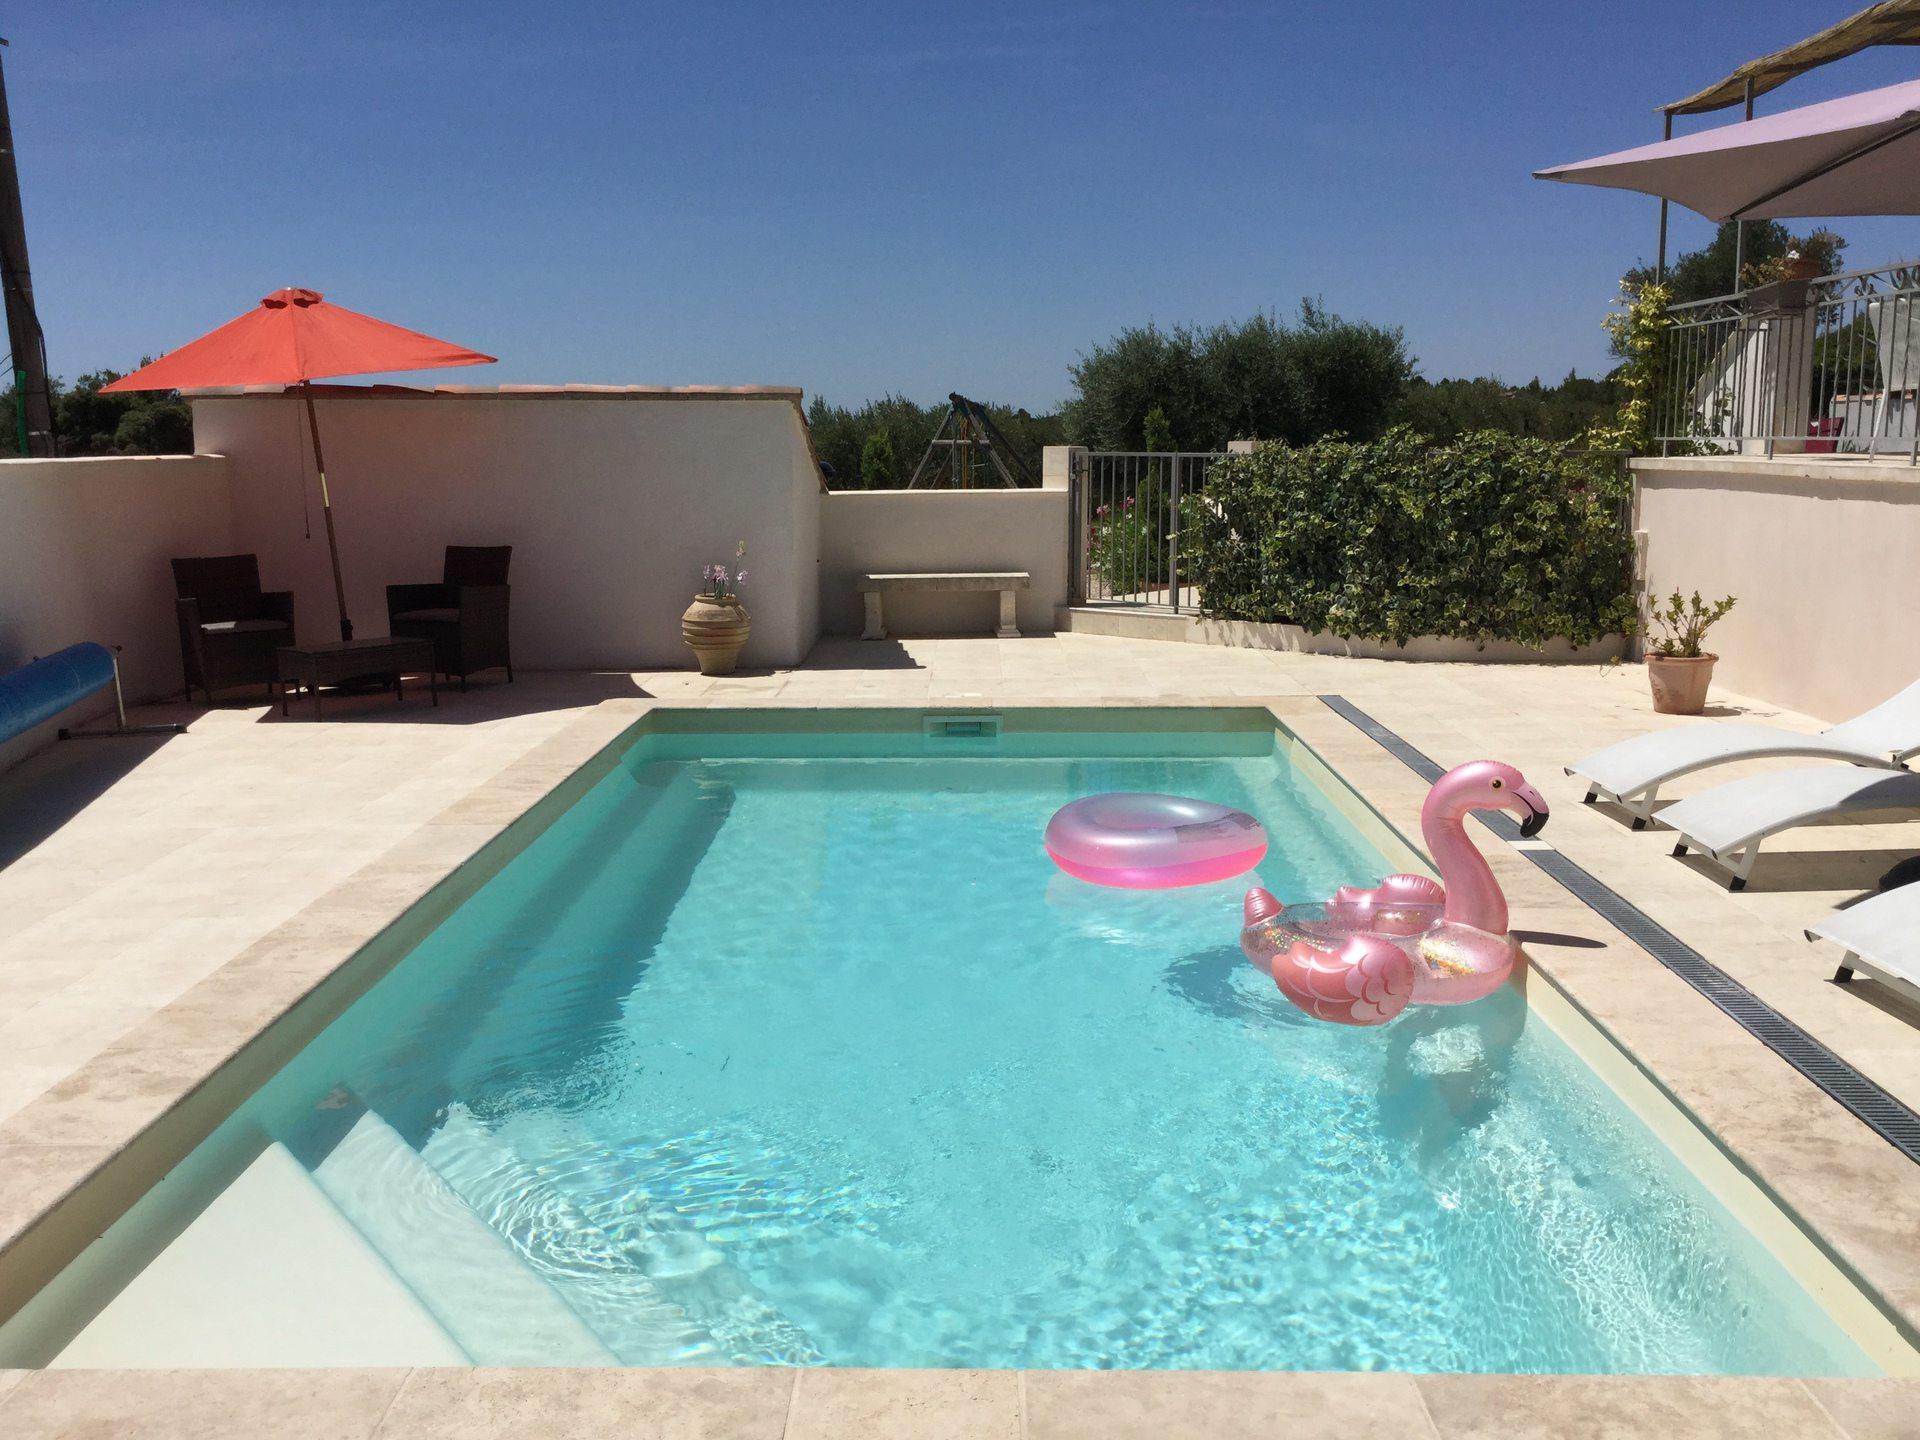 Property Image 2 - Vacation rental in the Alpilles, Provence, close to the village center - Beautiful view -Air conditionning